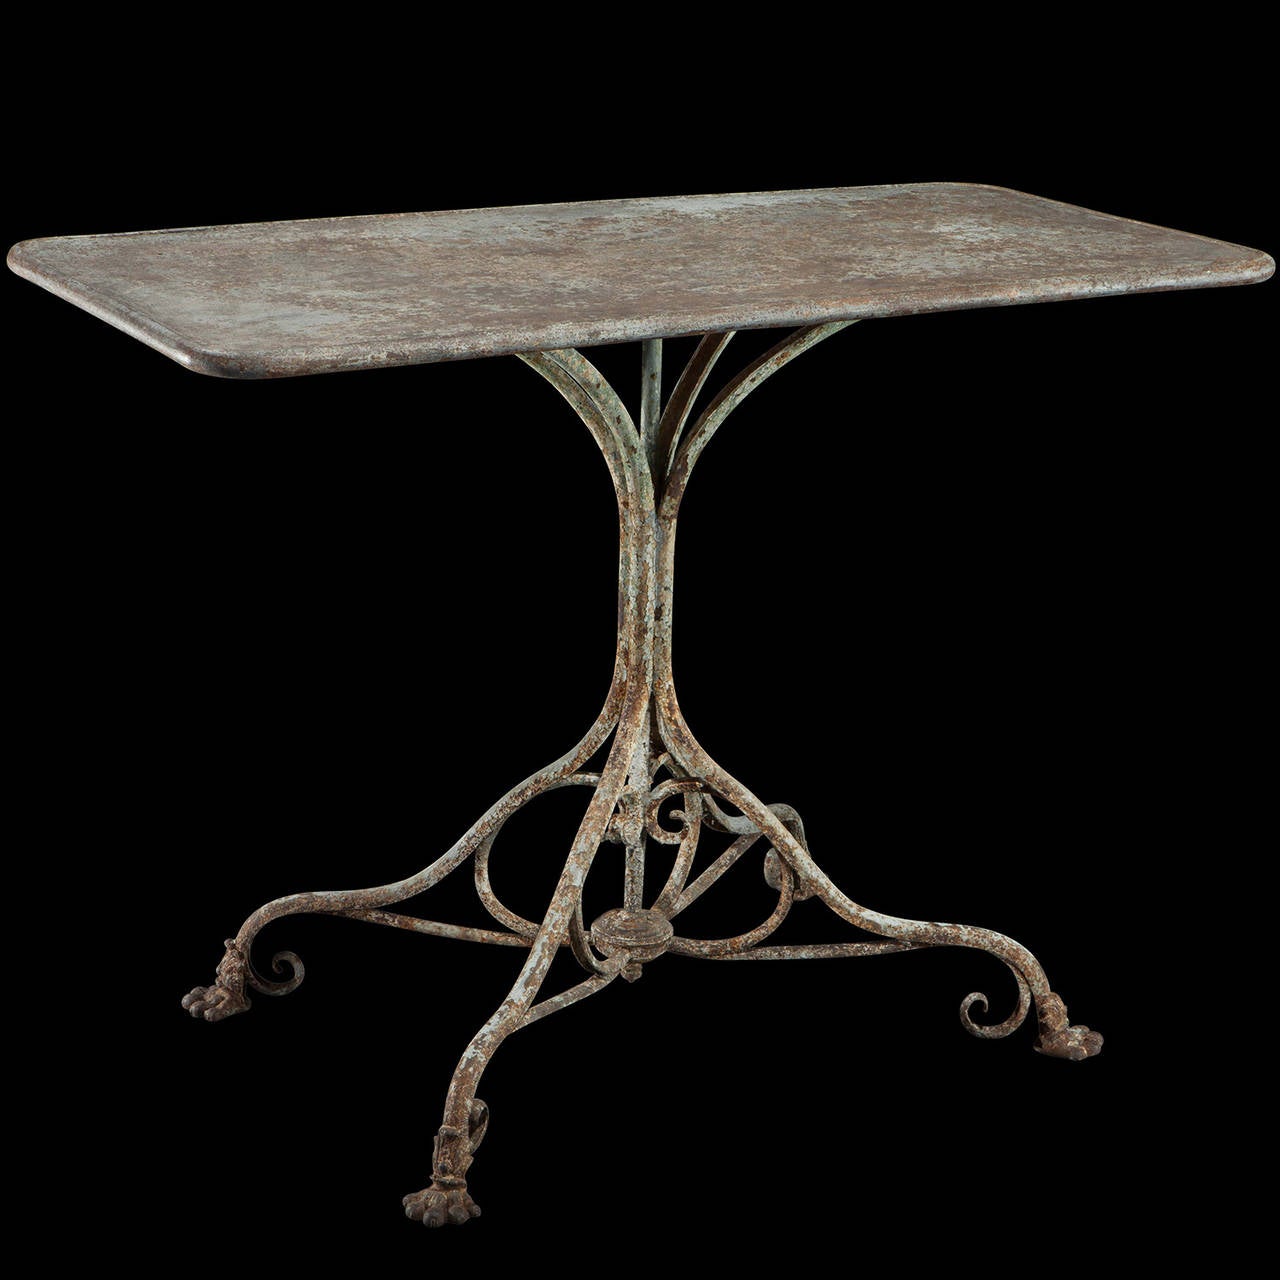 Simple table with ornate base and beautiful patina.